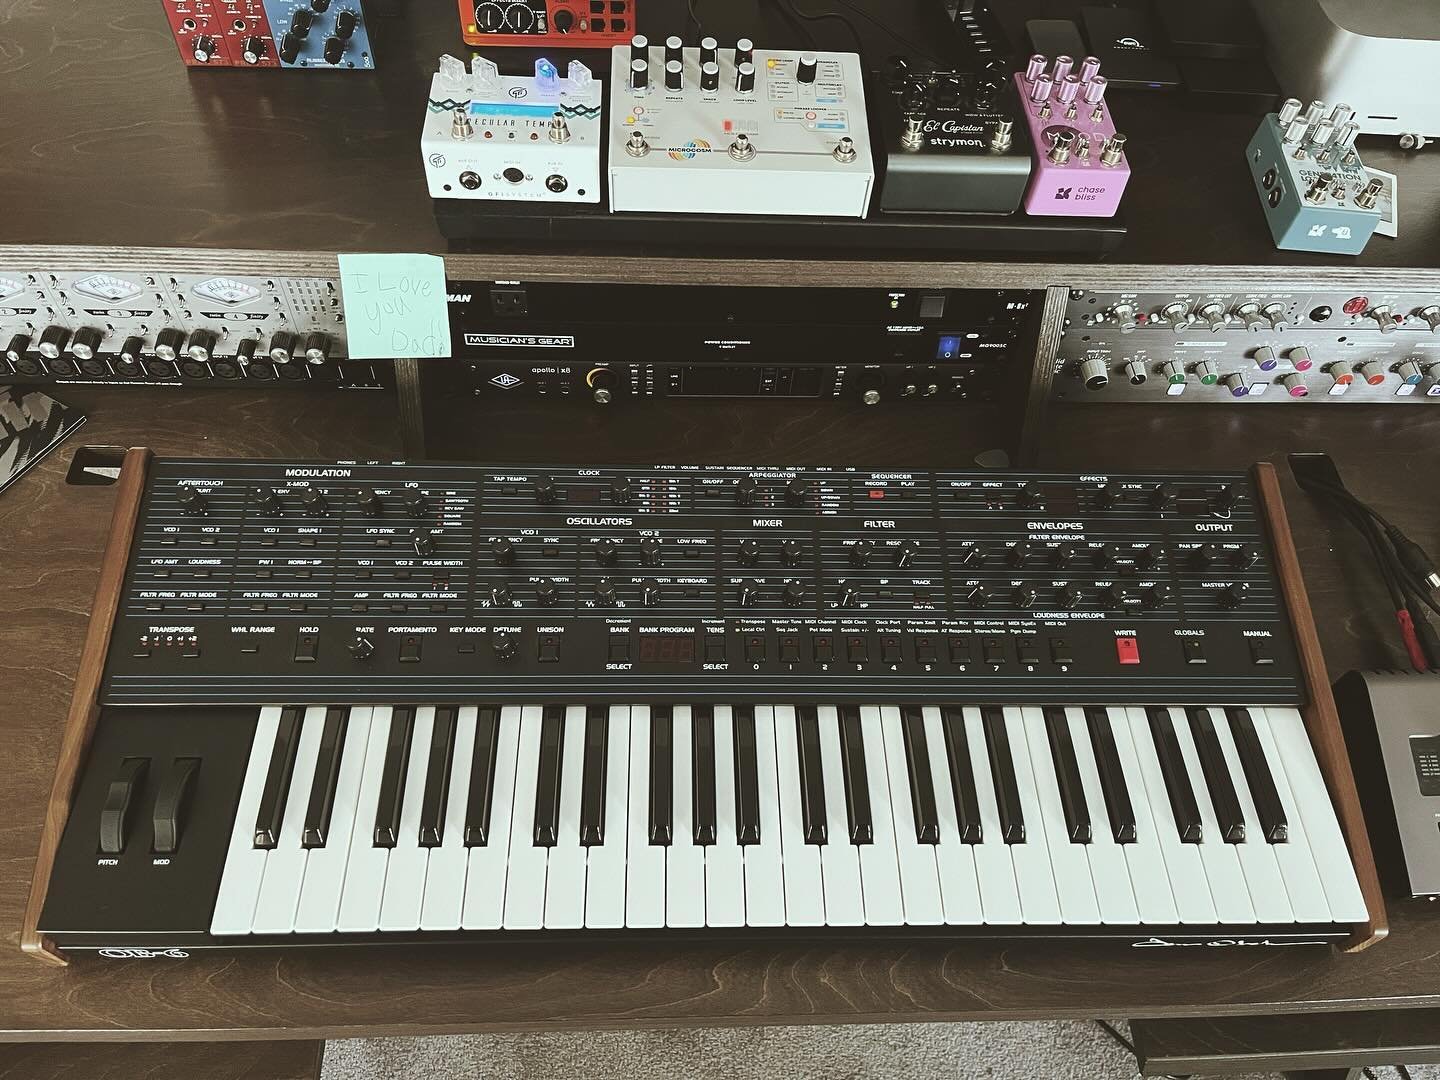 very pleased to welcome the @oberheim_electronics OB6 to the studio. this thing is inspiring on a different level. surprisingly intuitive and easy to navigate as well. truly an analog beast. 

trying to stay creative in a tumultuous season of life. k